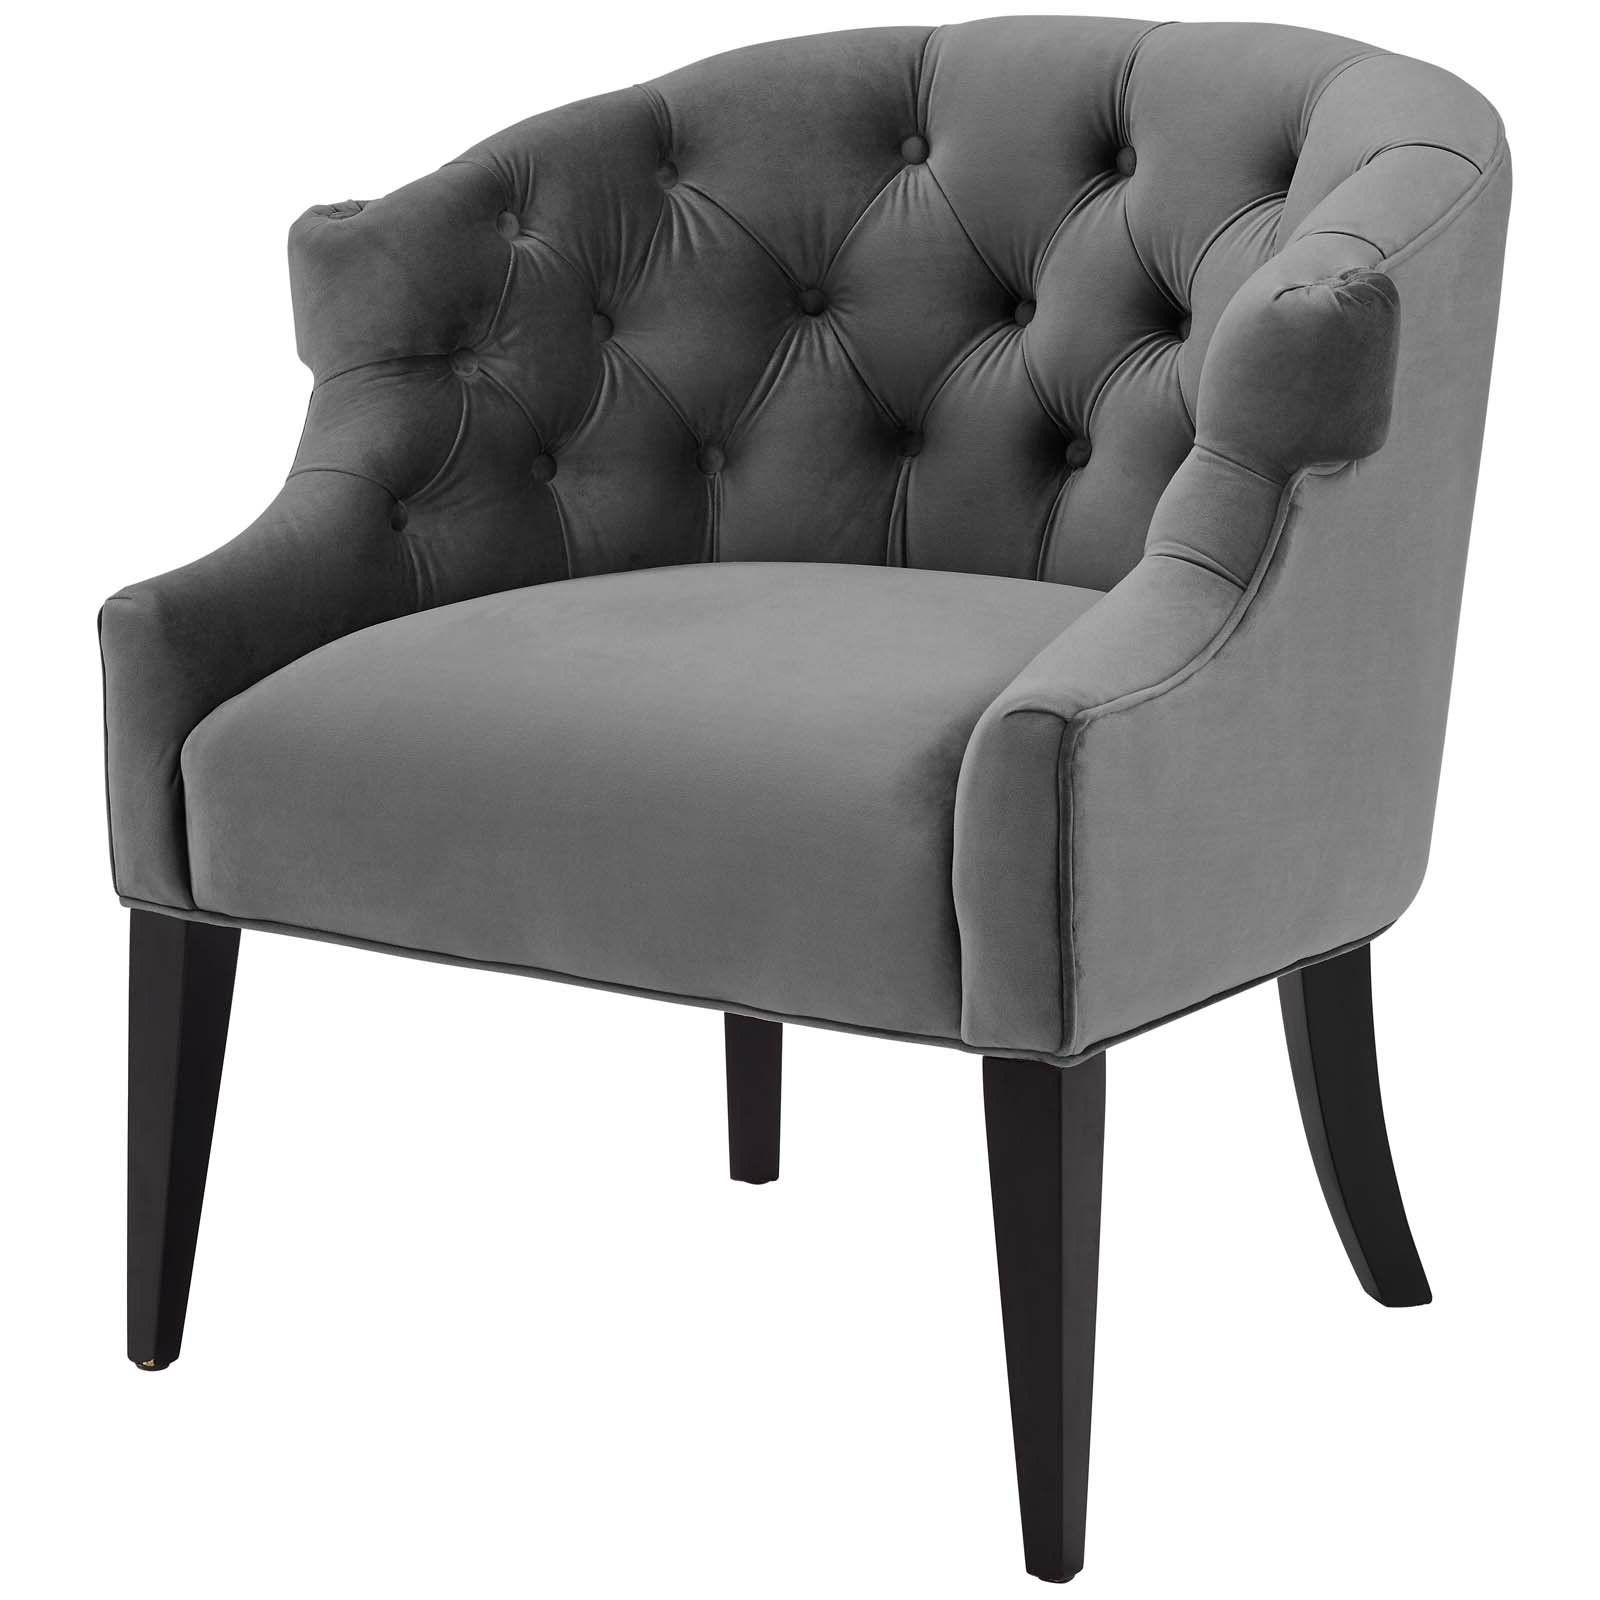 2020 Amerson Armchair Pertaining To Ringwold Armchairs (View 11 of 20)